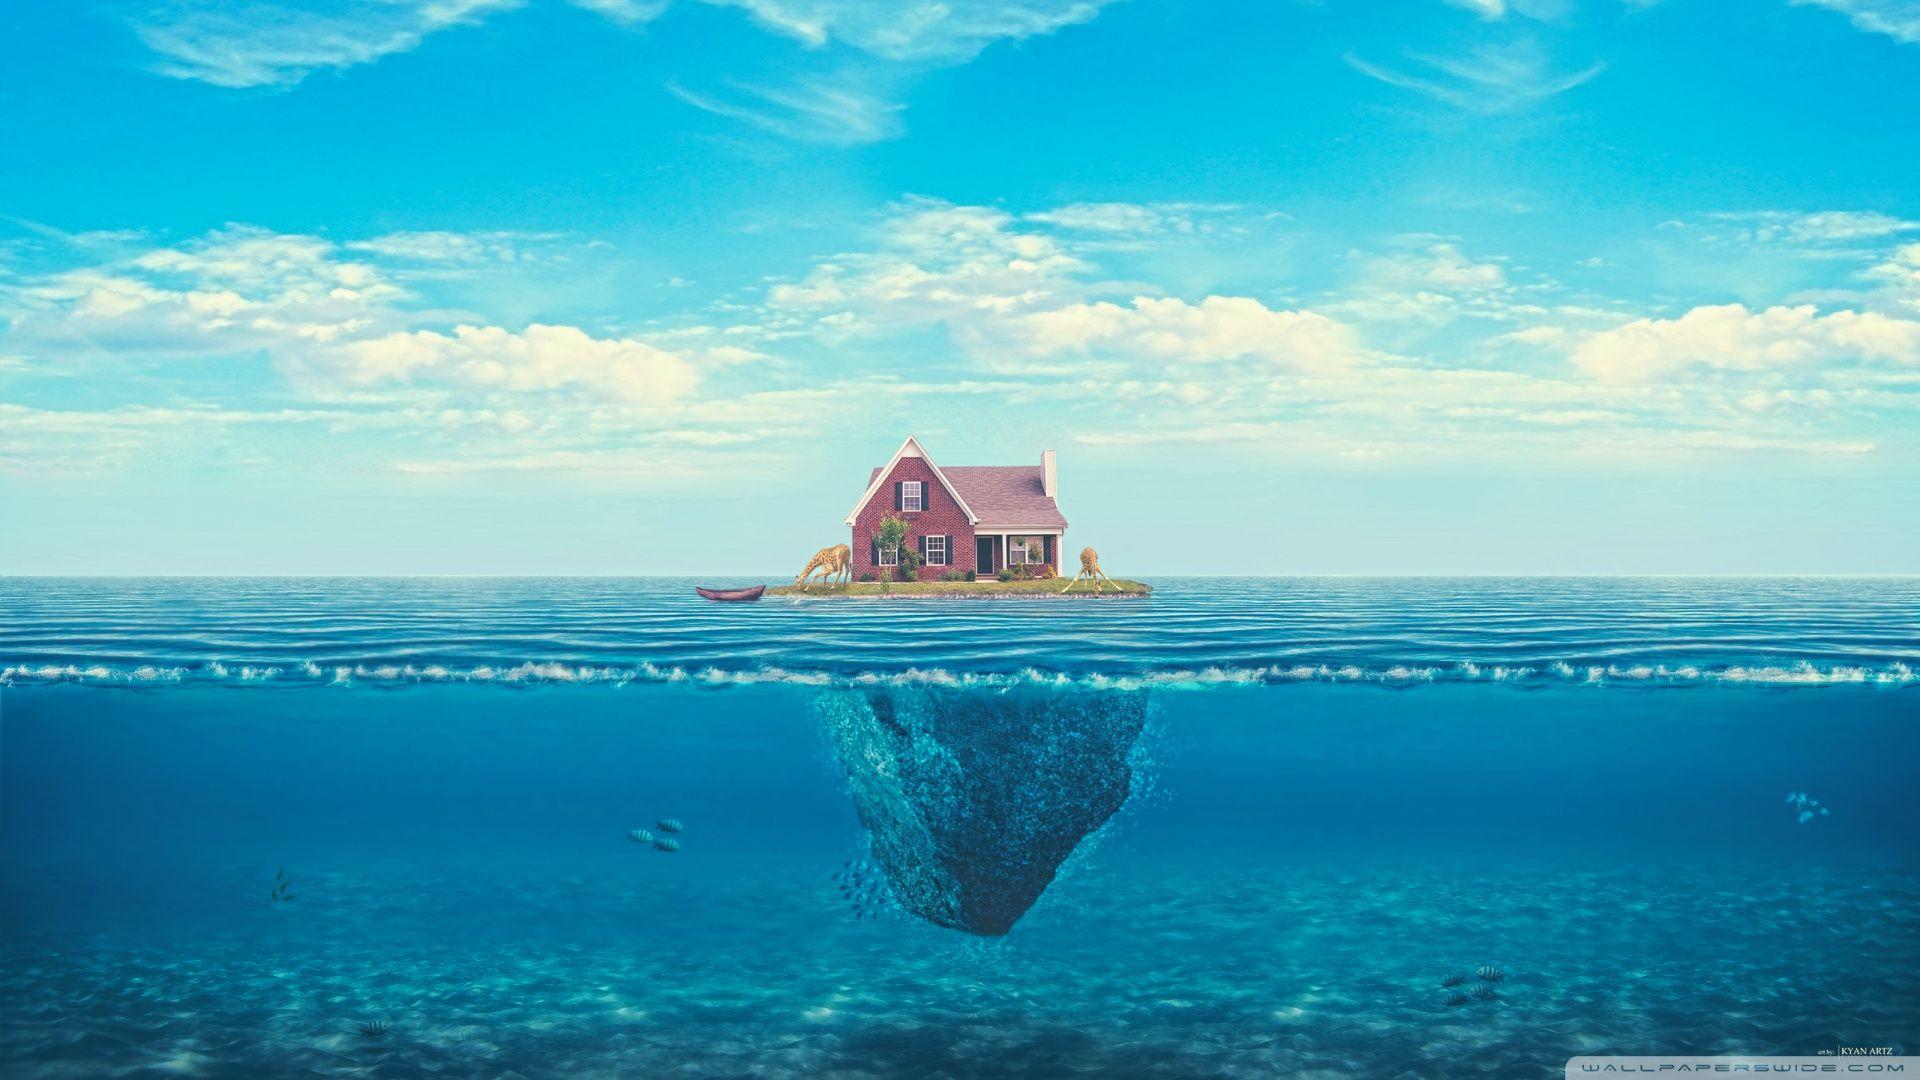 House in the ocean [Wallpaper]. Reviews, news, tips, and tricks